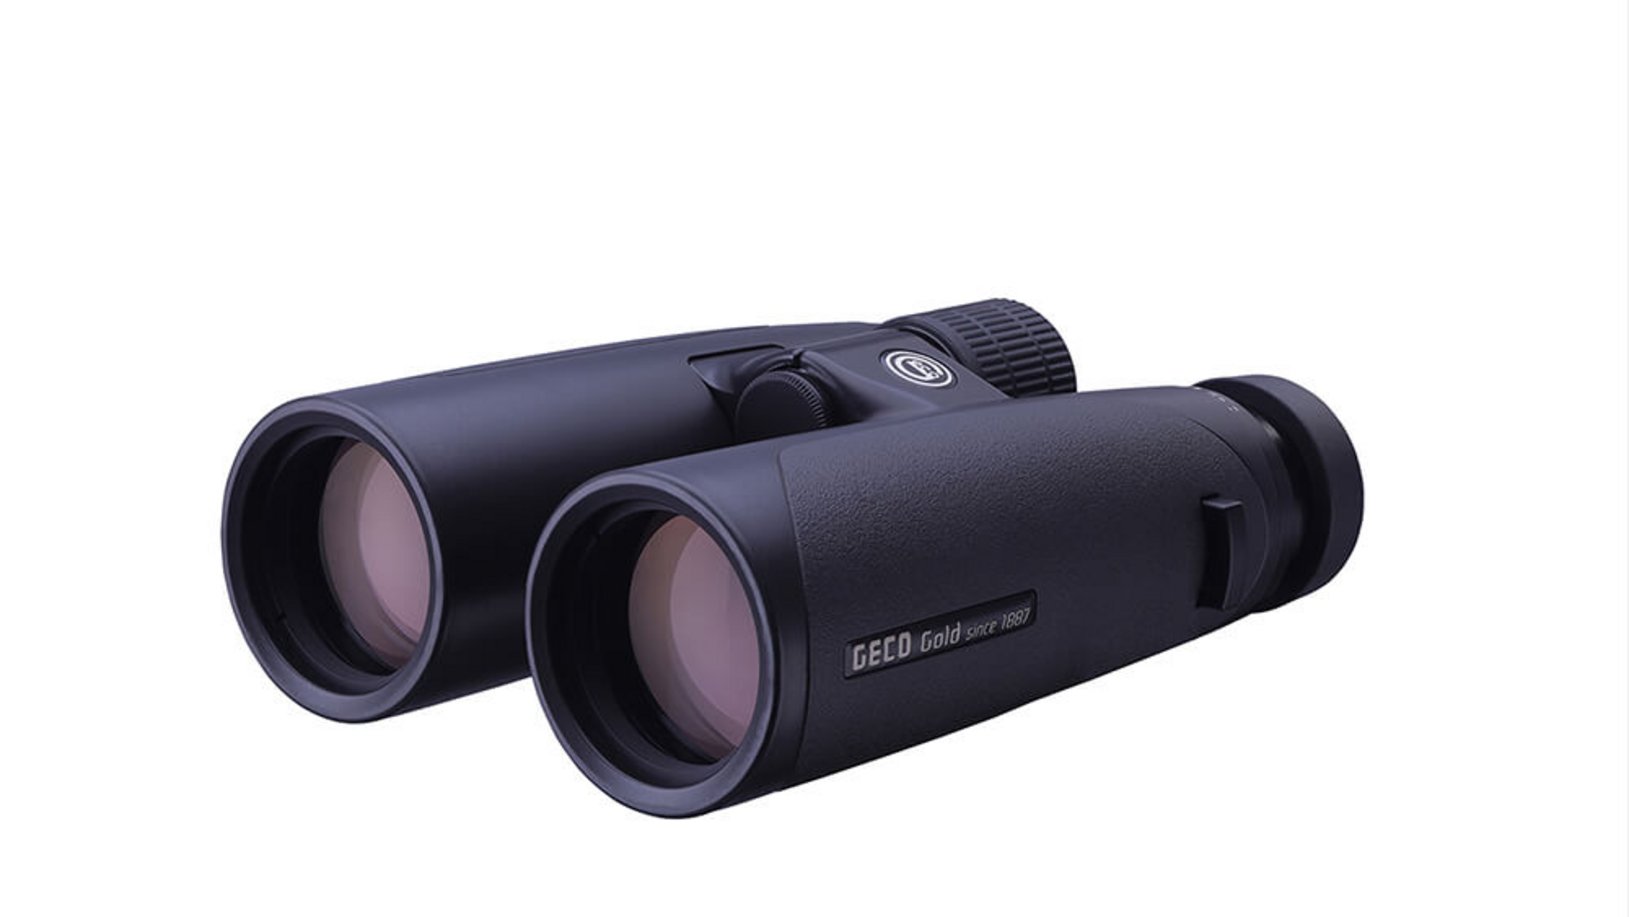 Image of the GECO Binocular Gold 10x42 Black in lying position